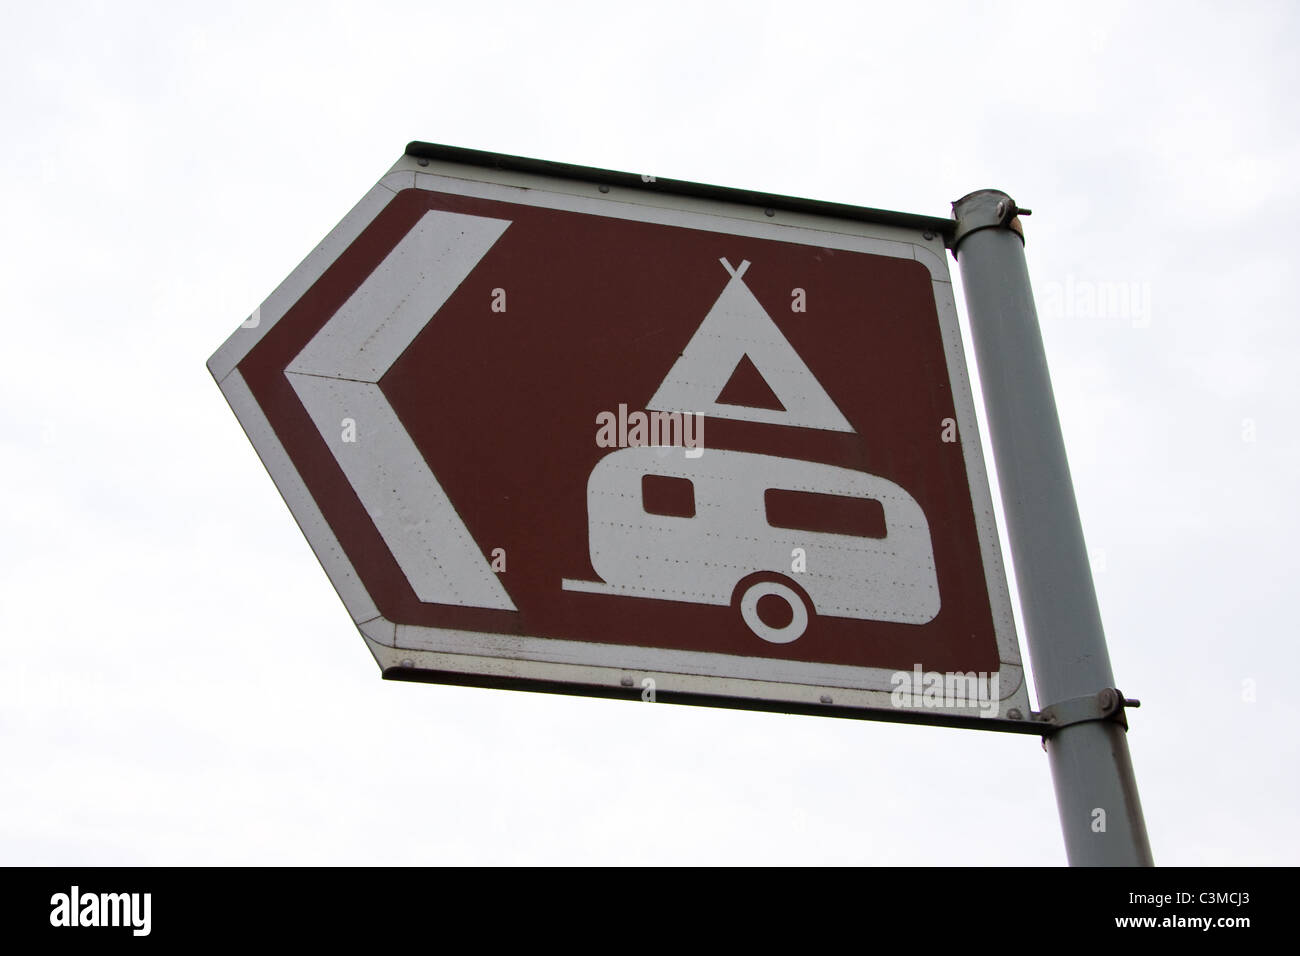 International Camping and Caravan site sign Banque D'Images